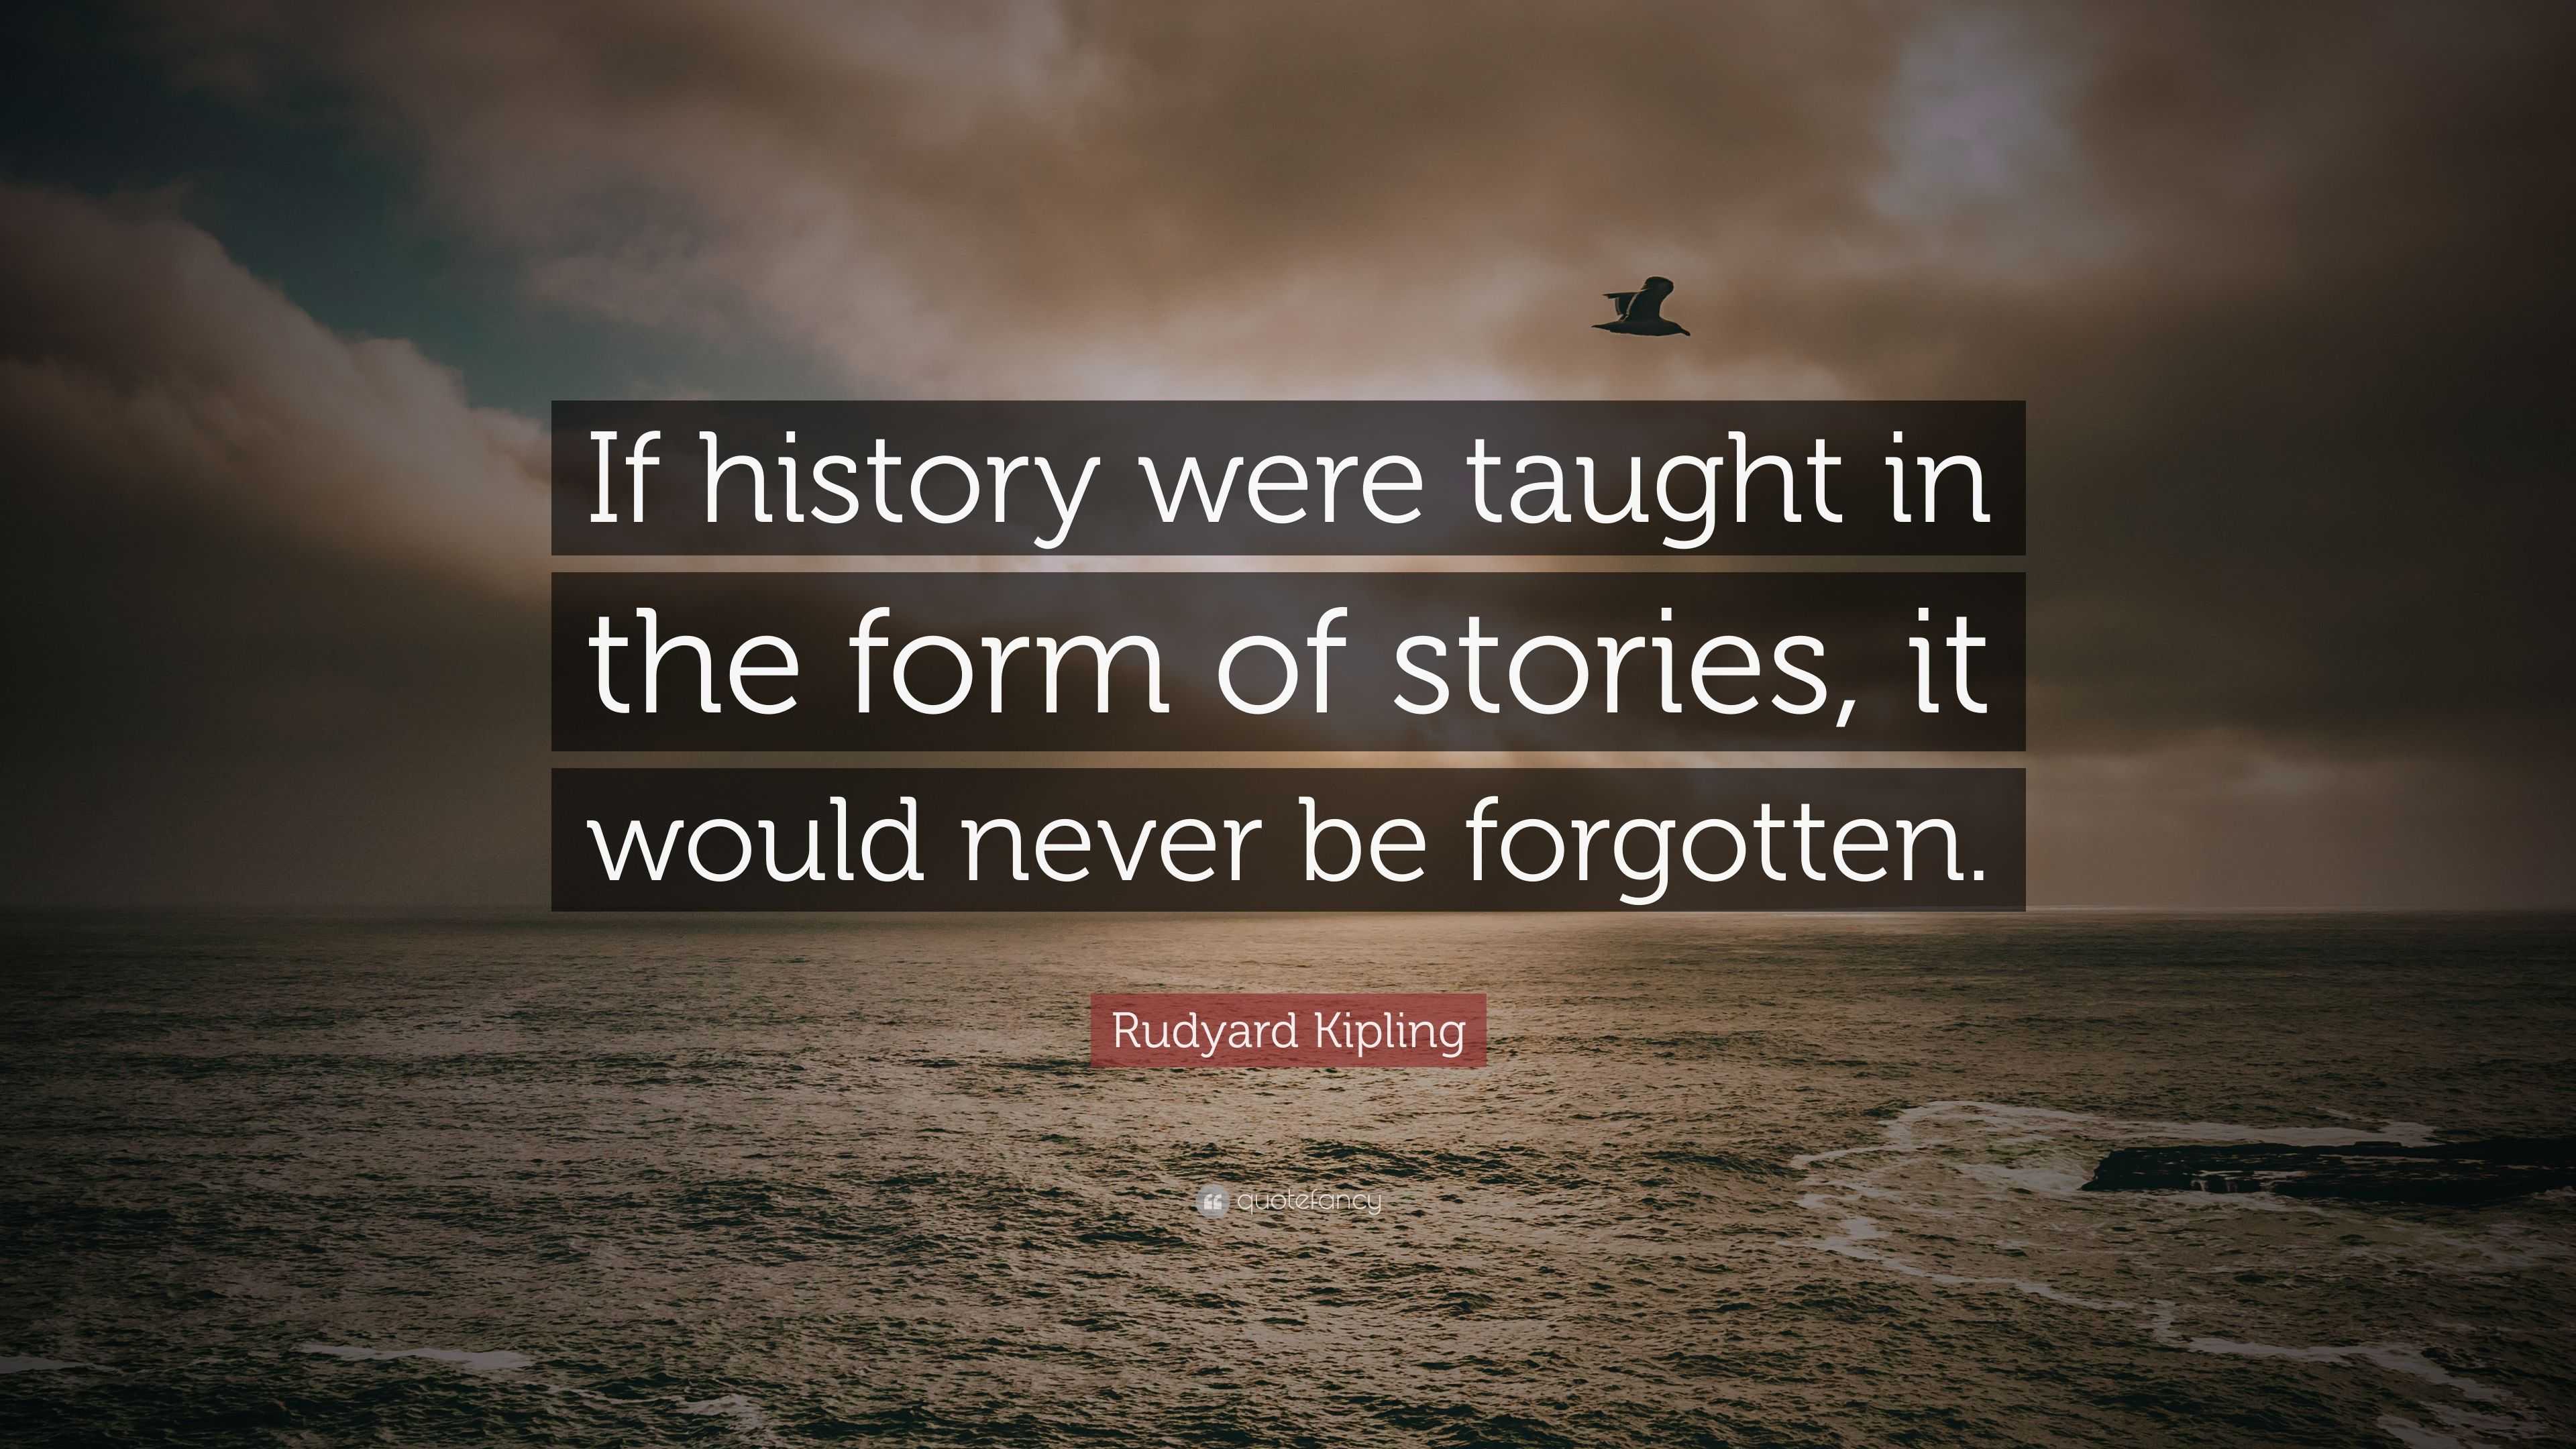 rudyard-kipling-quote-if-history-were-taught-in-the-form-of-stories